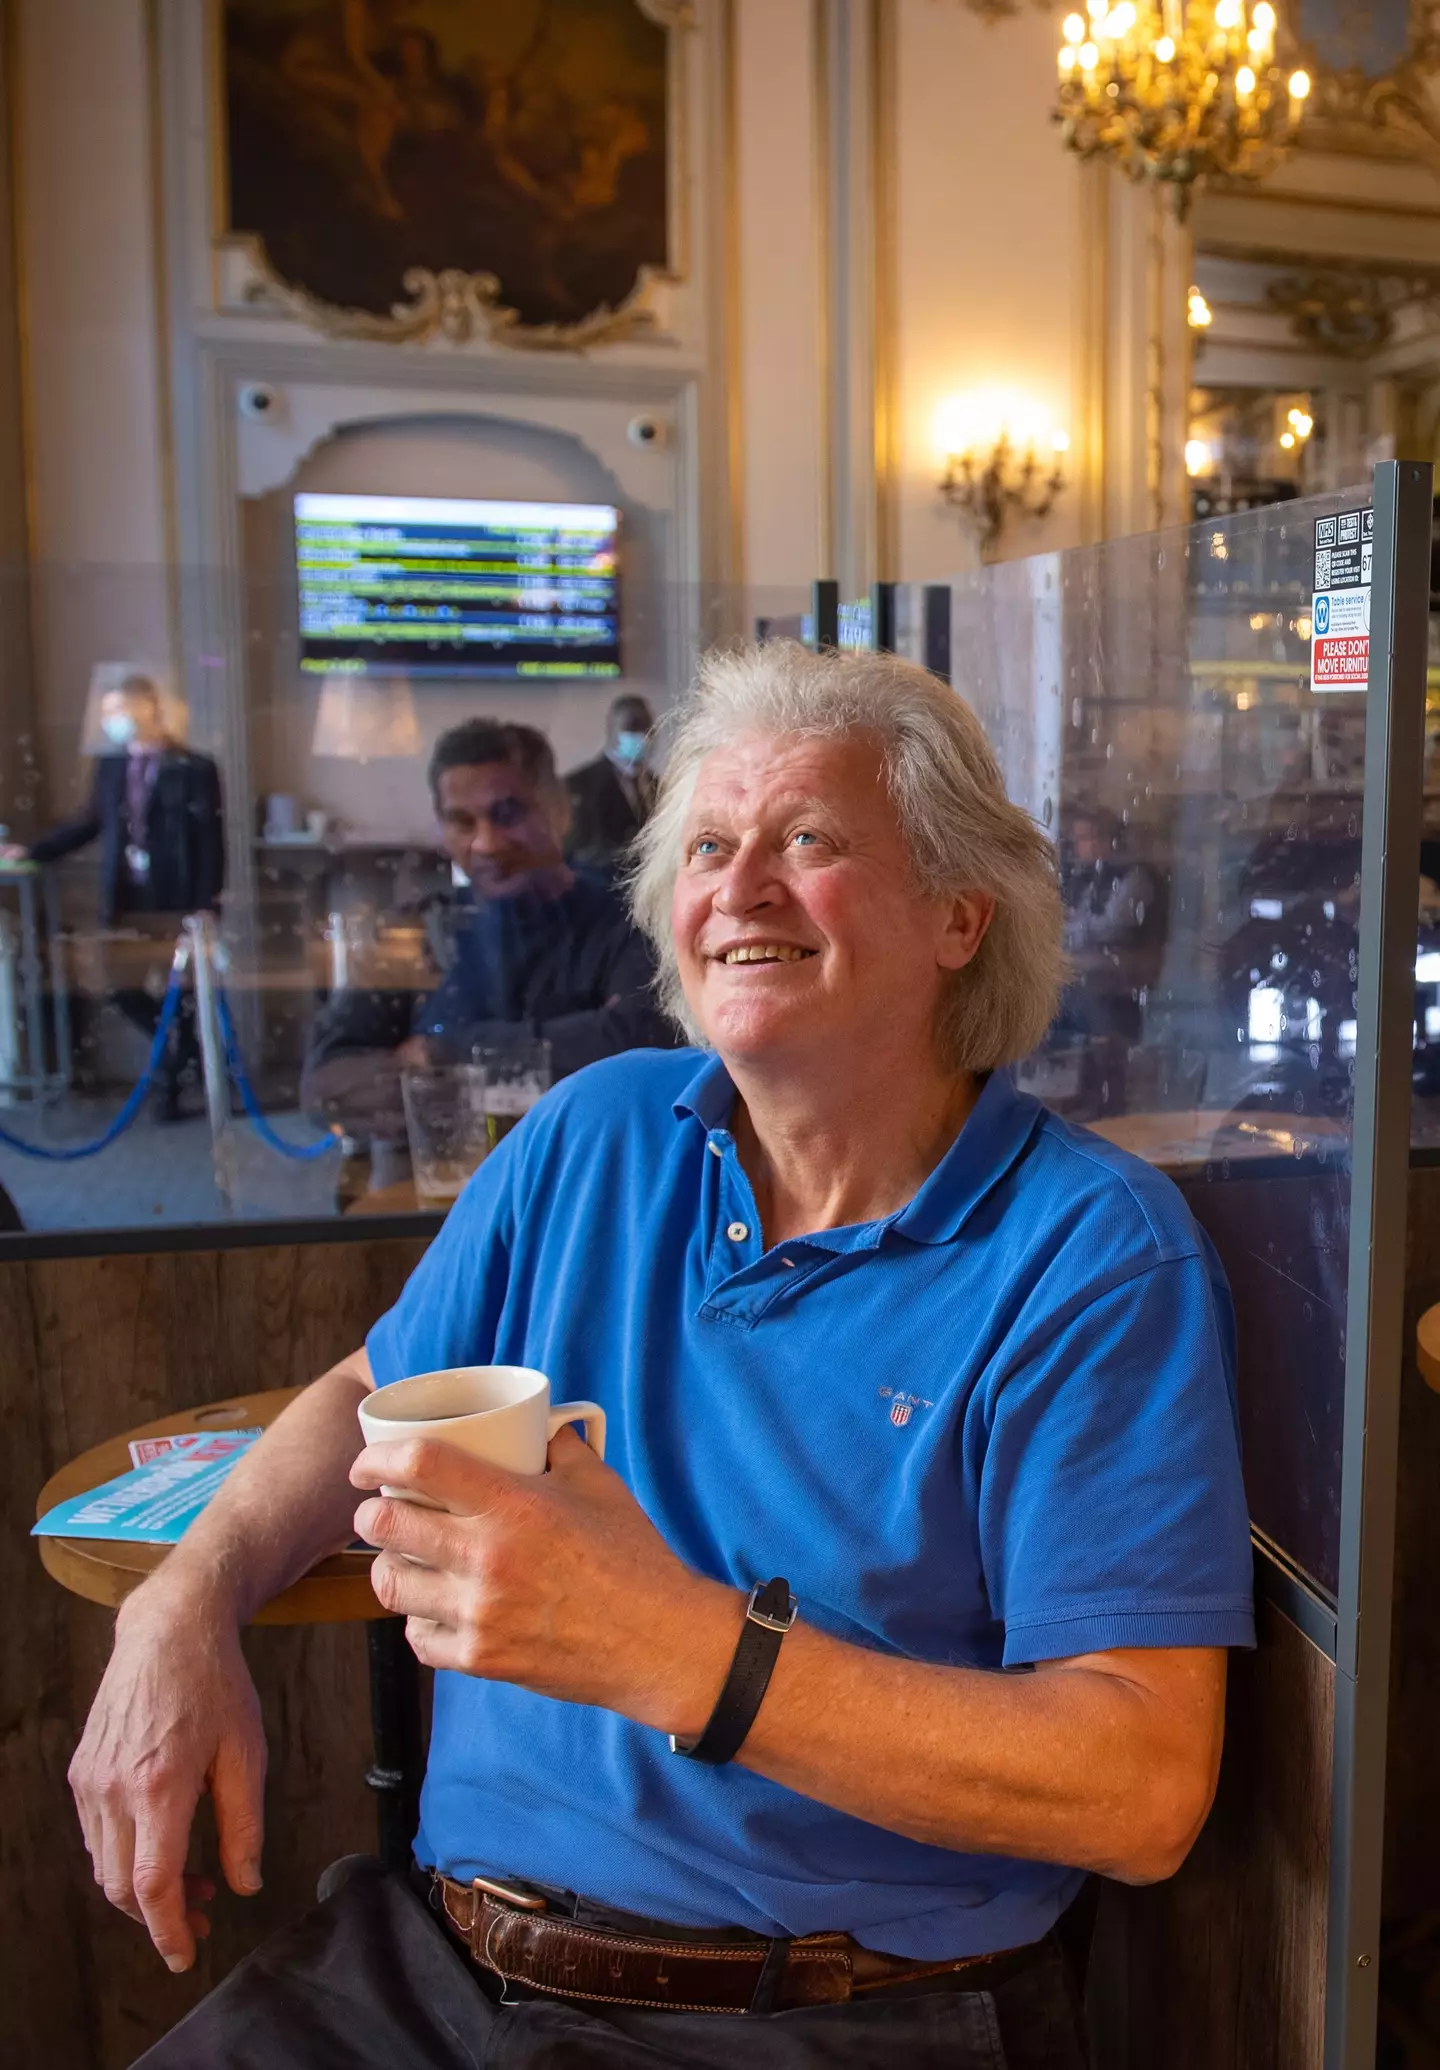 Wetherspoons' founder Tim Martin has played a blinder.